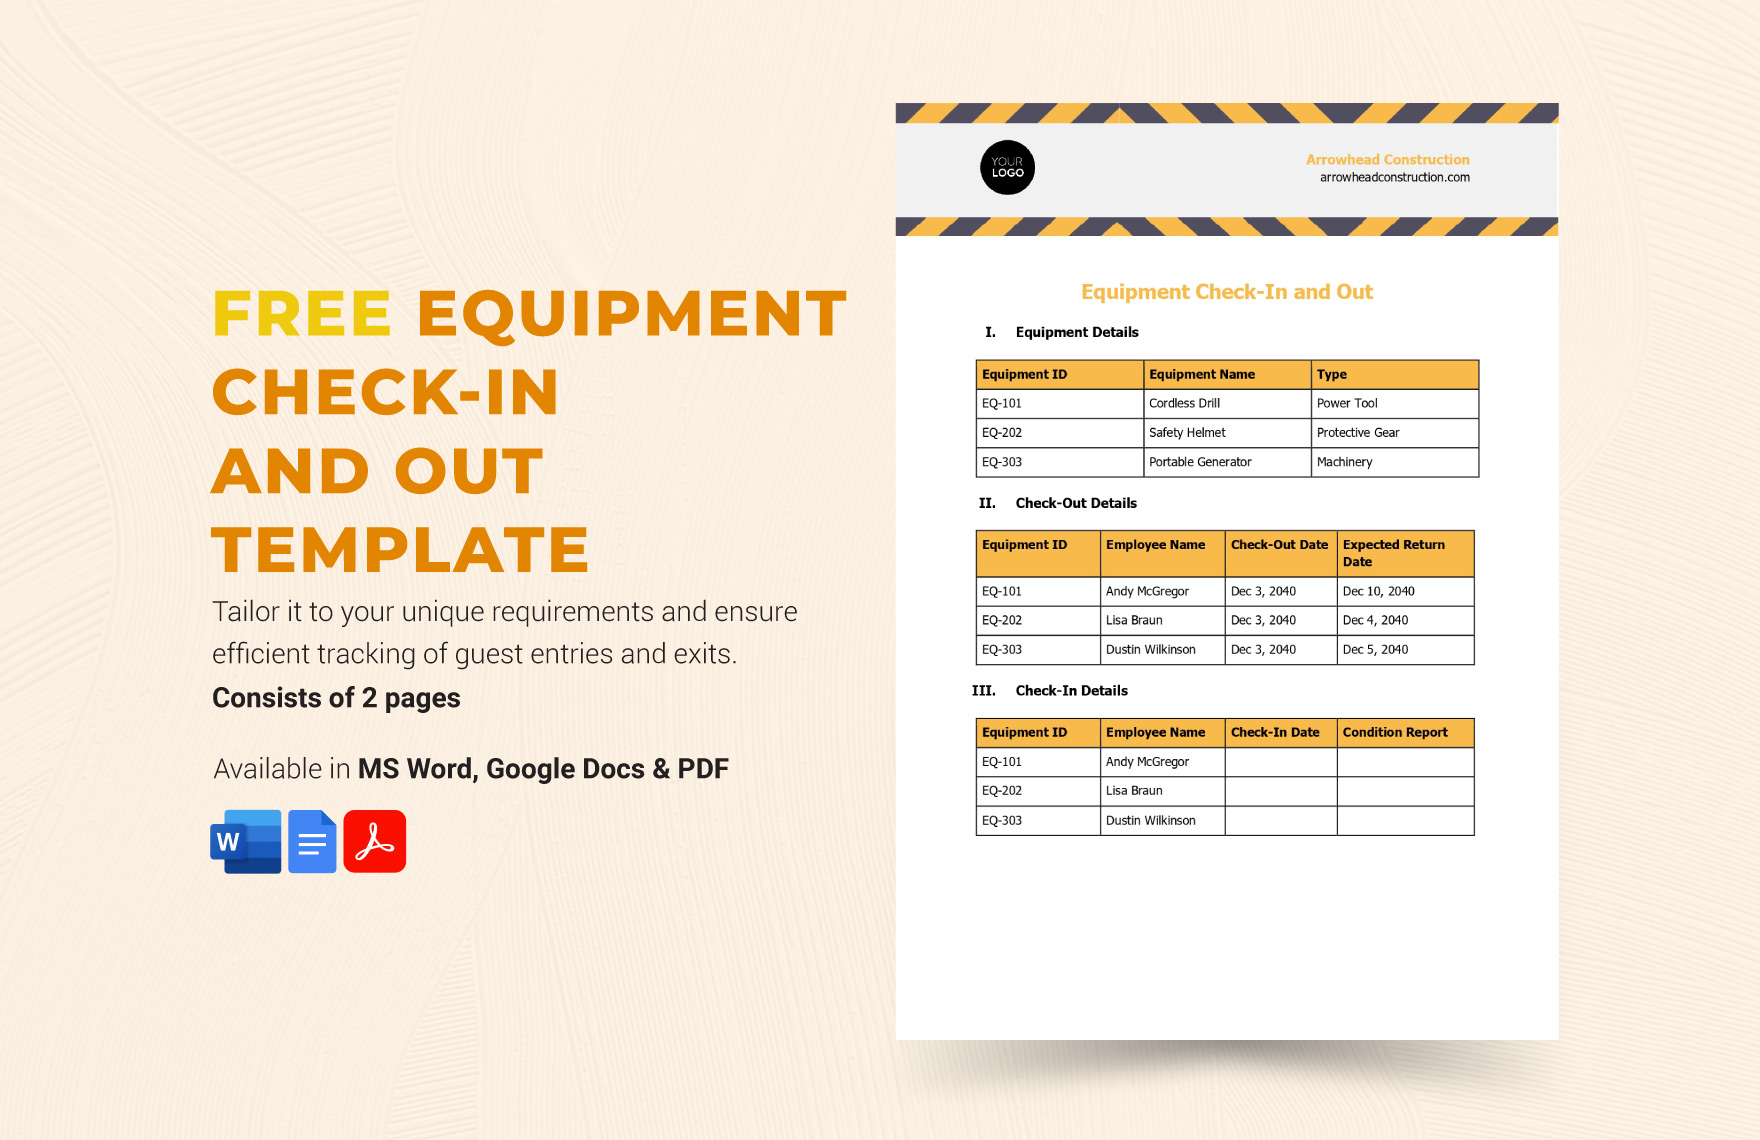 Equipment Check-in and Out Template